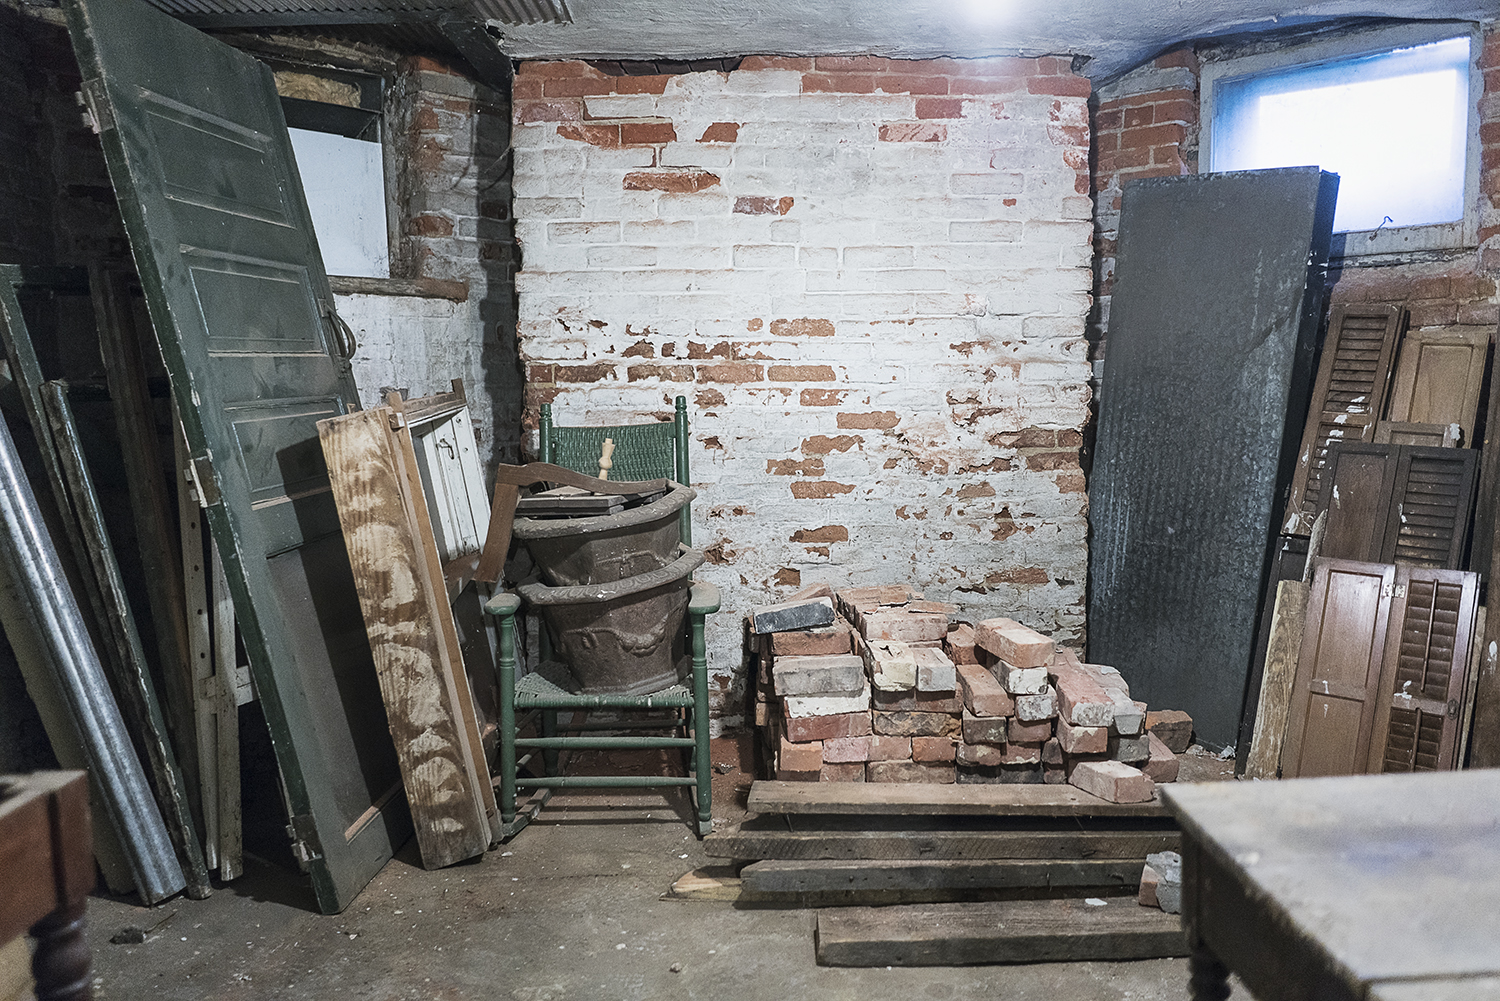 Flint, MI - Tuesday, October 31, 2017: Building materials are piled in a small corner of the basement of the Whaley Historic House Museum. 